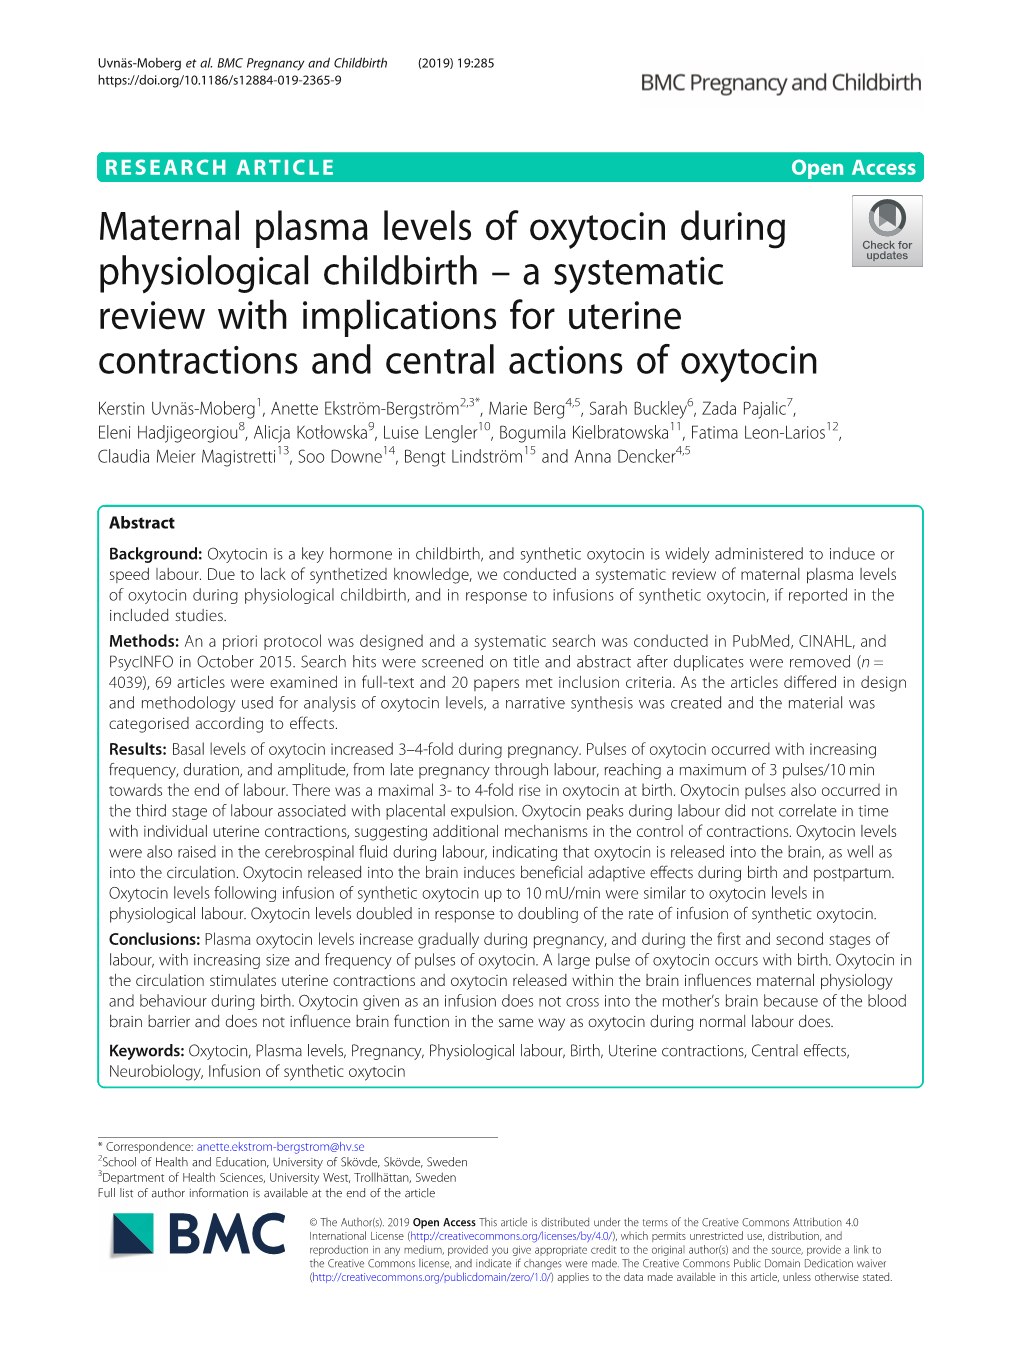 Maternal Plasma Levels of Oxytocin During Physiological Childbirth